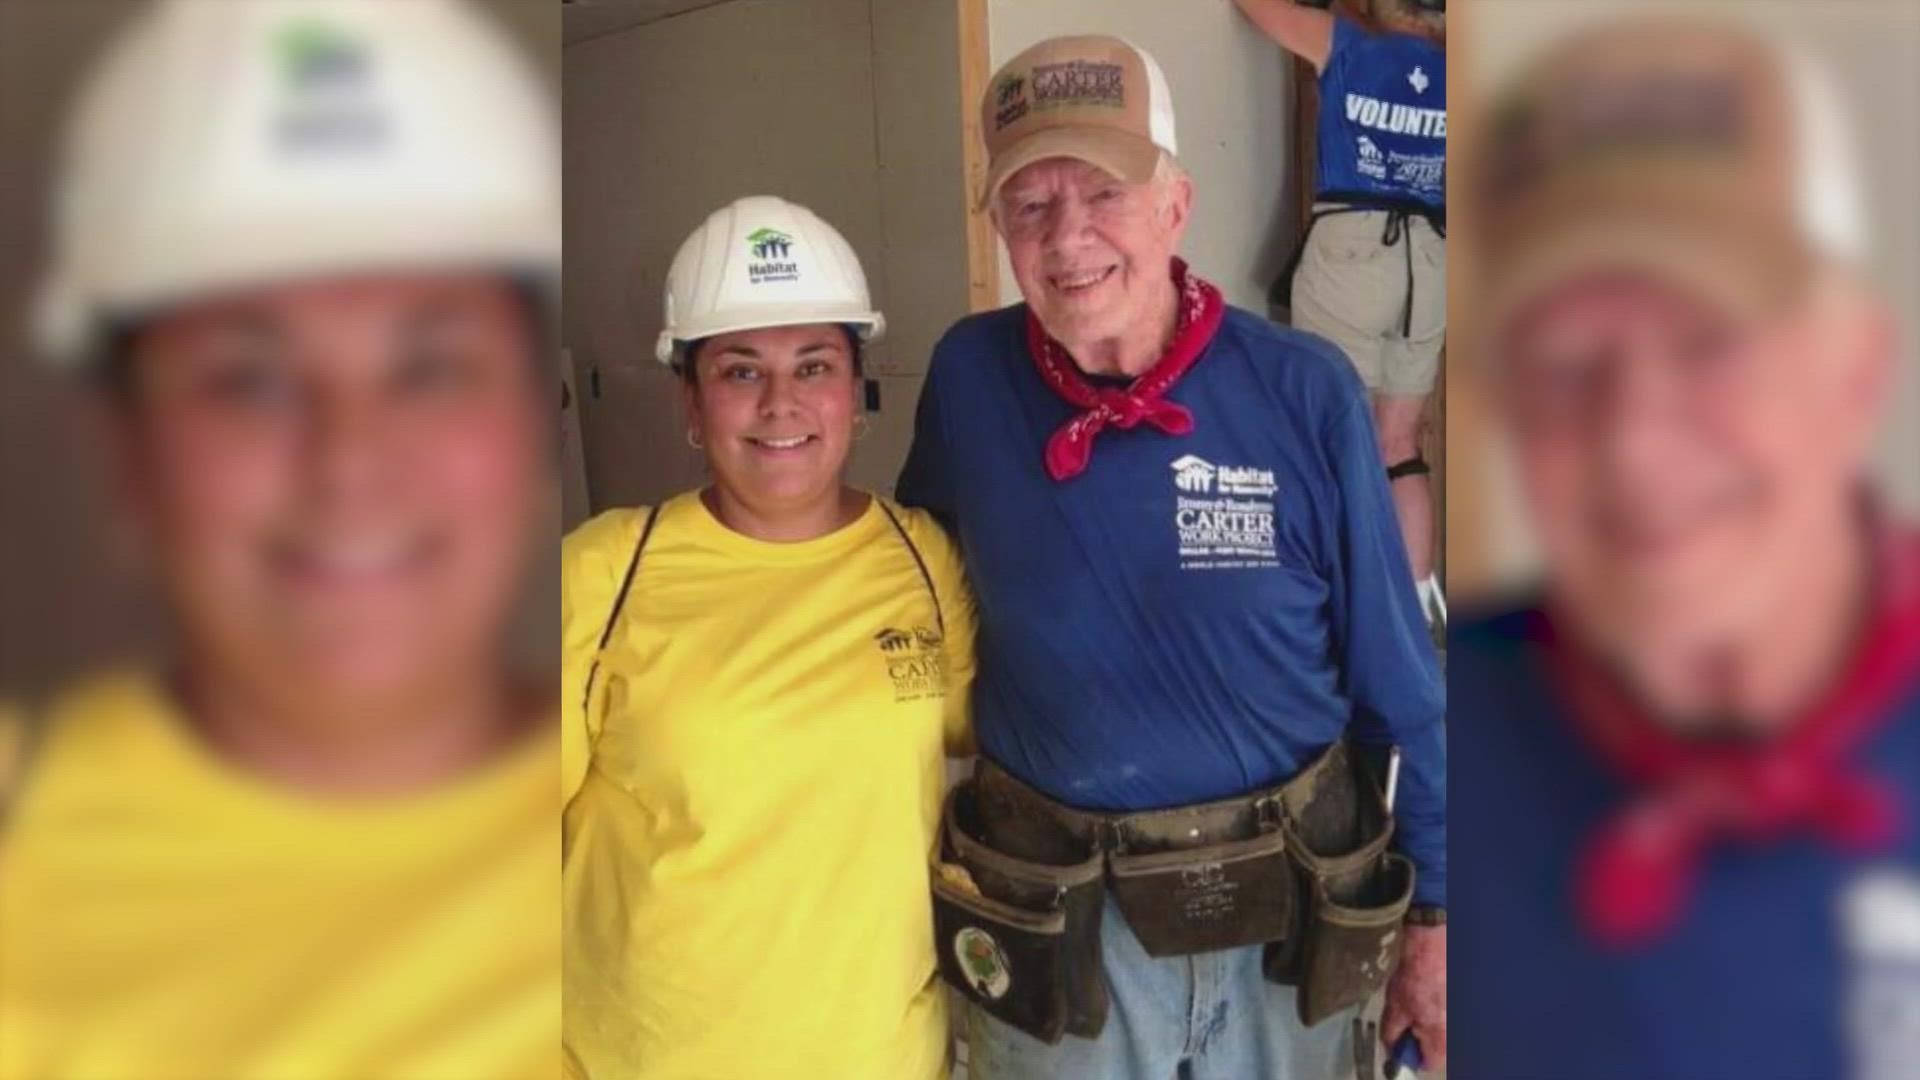 In 2014, Benita Luna met the former president, who helped build the home her family lives in during his Habitat for Humanity visit to Dallas.